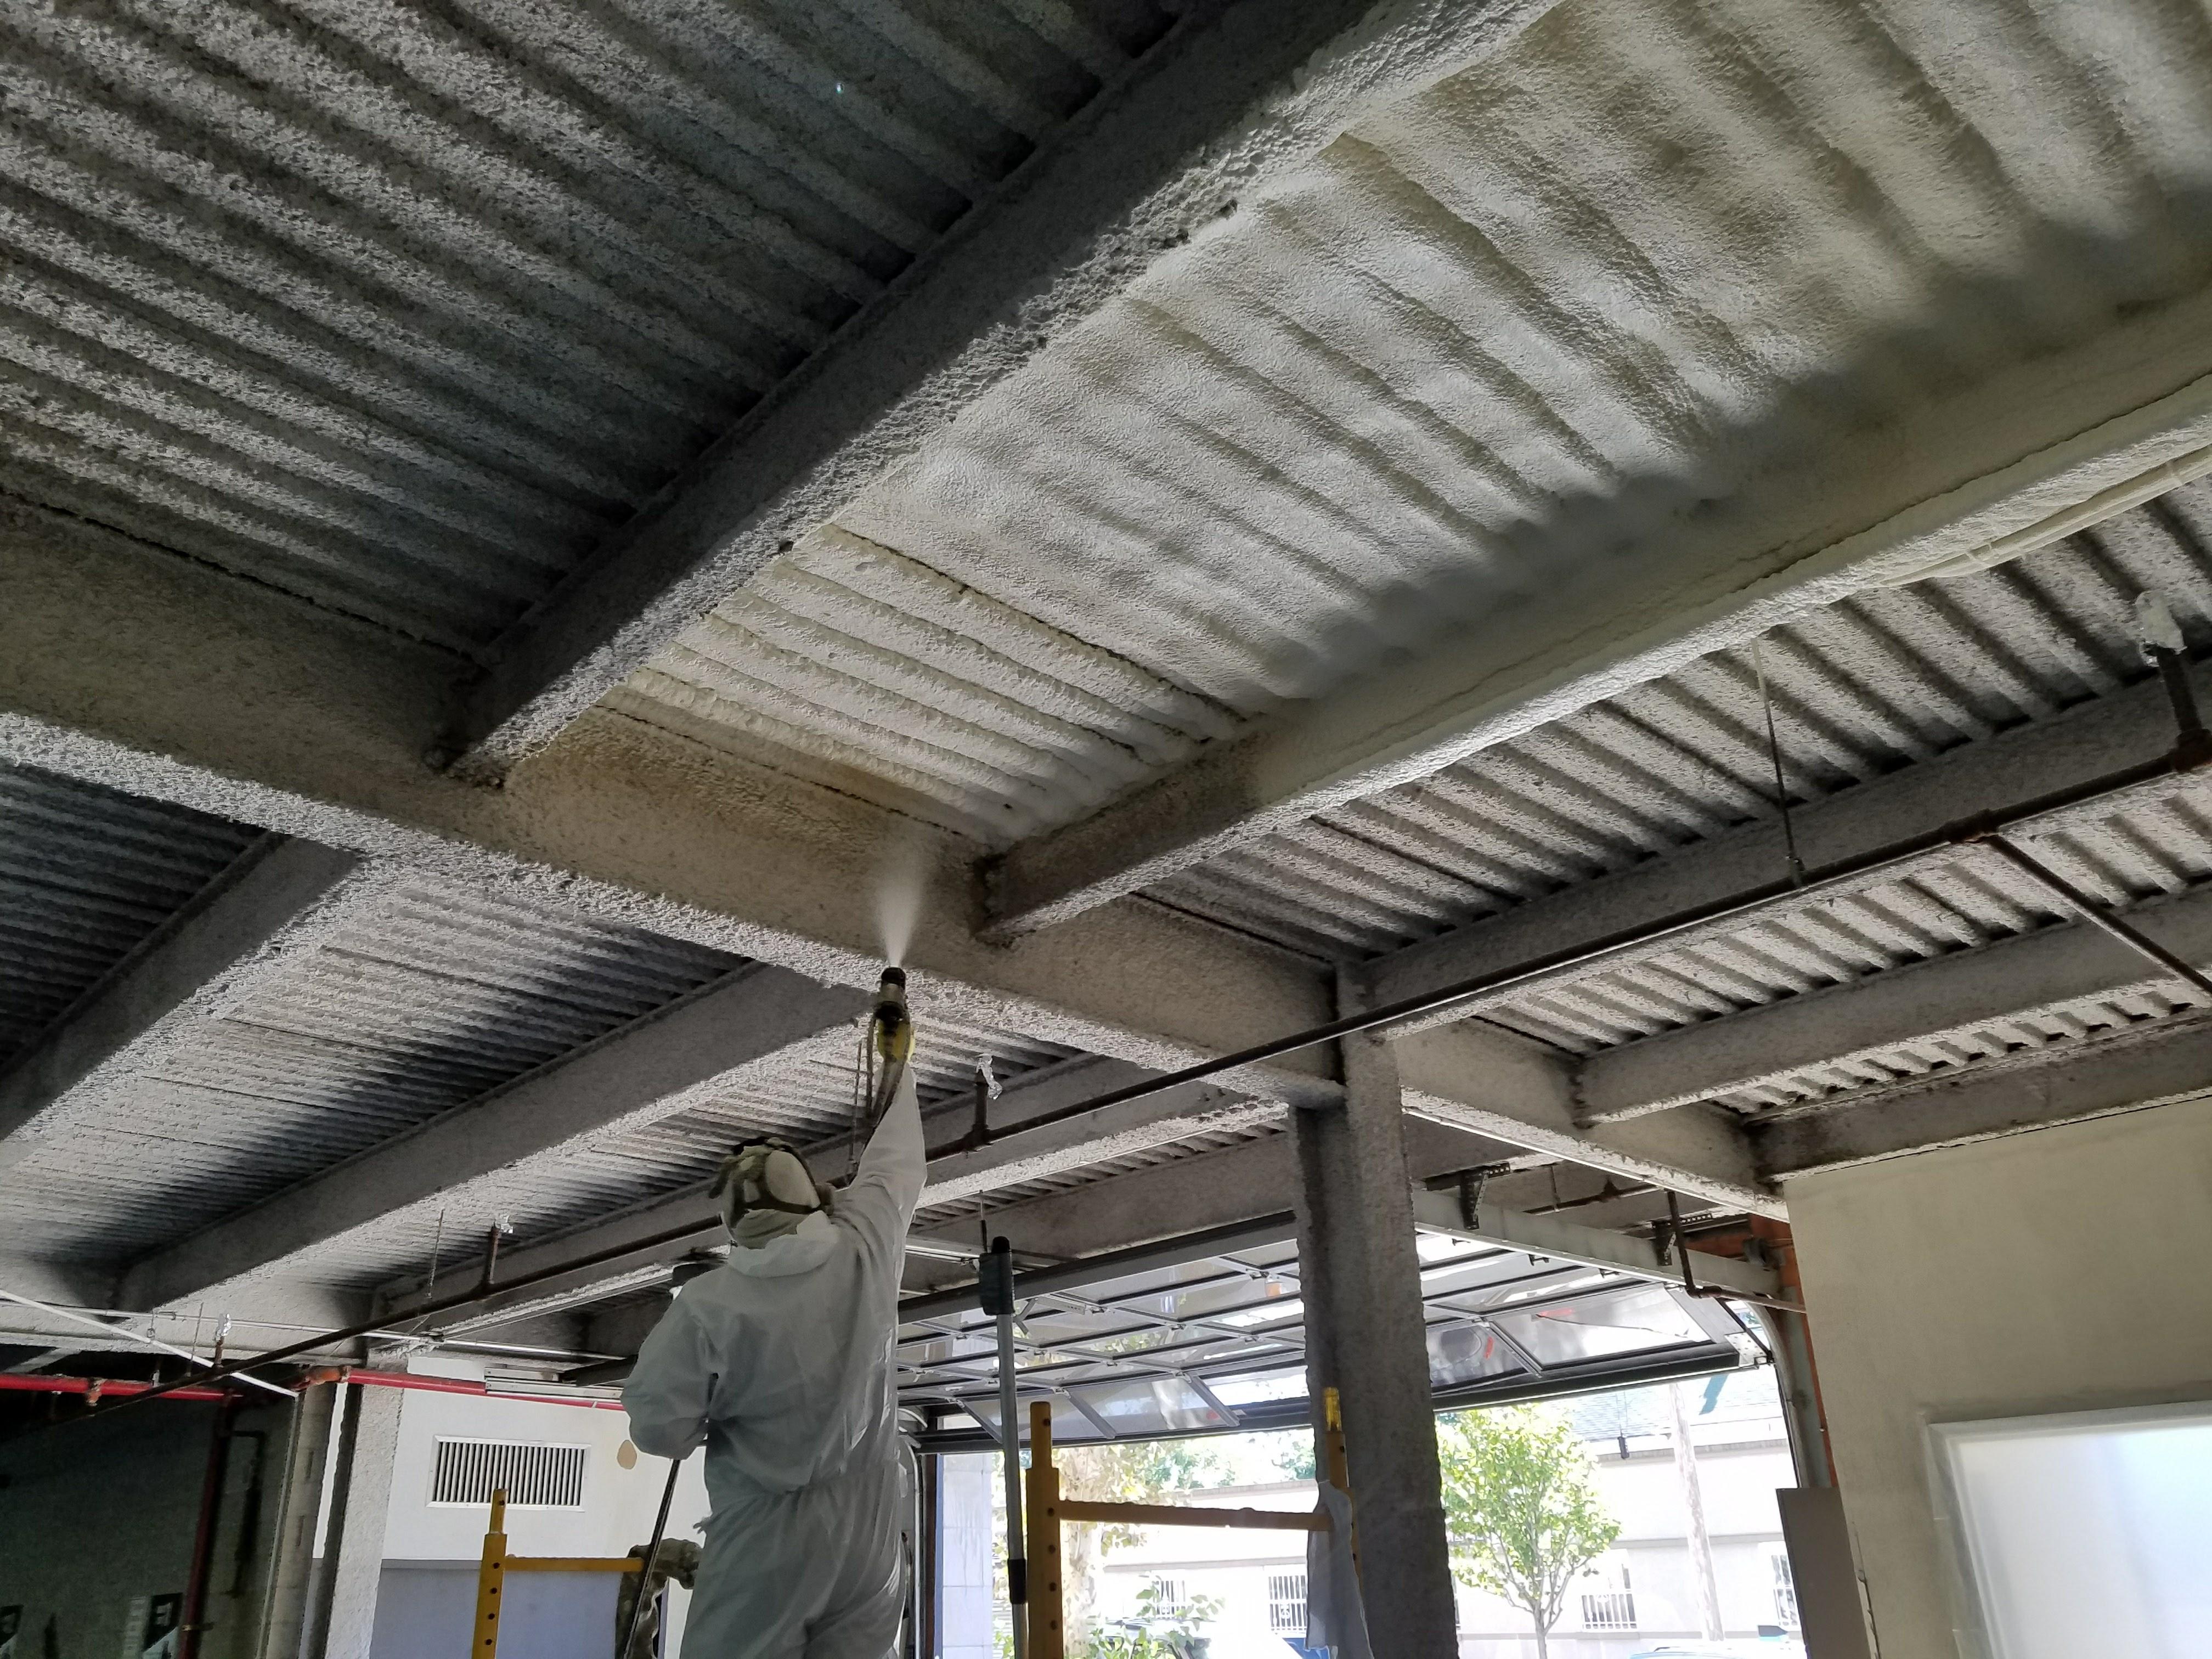 Condo Parking Garage Ceiling: 42nd Ave, Bayside, NY 11361